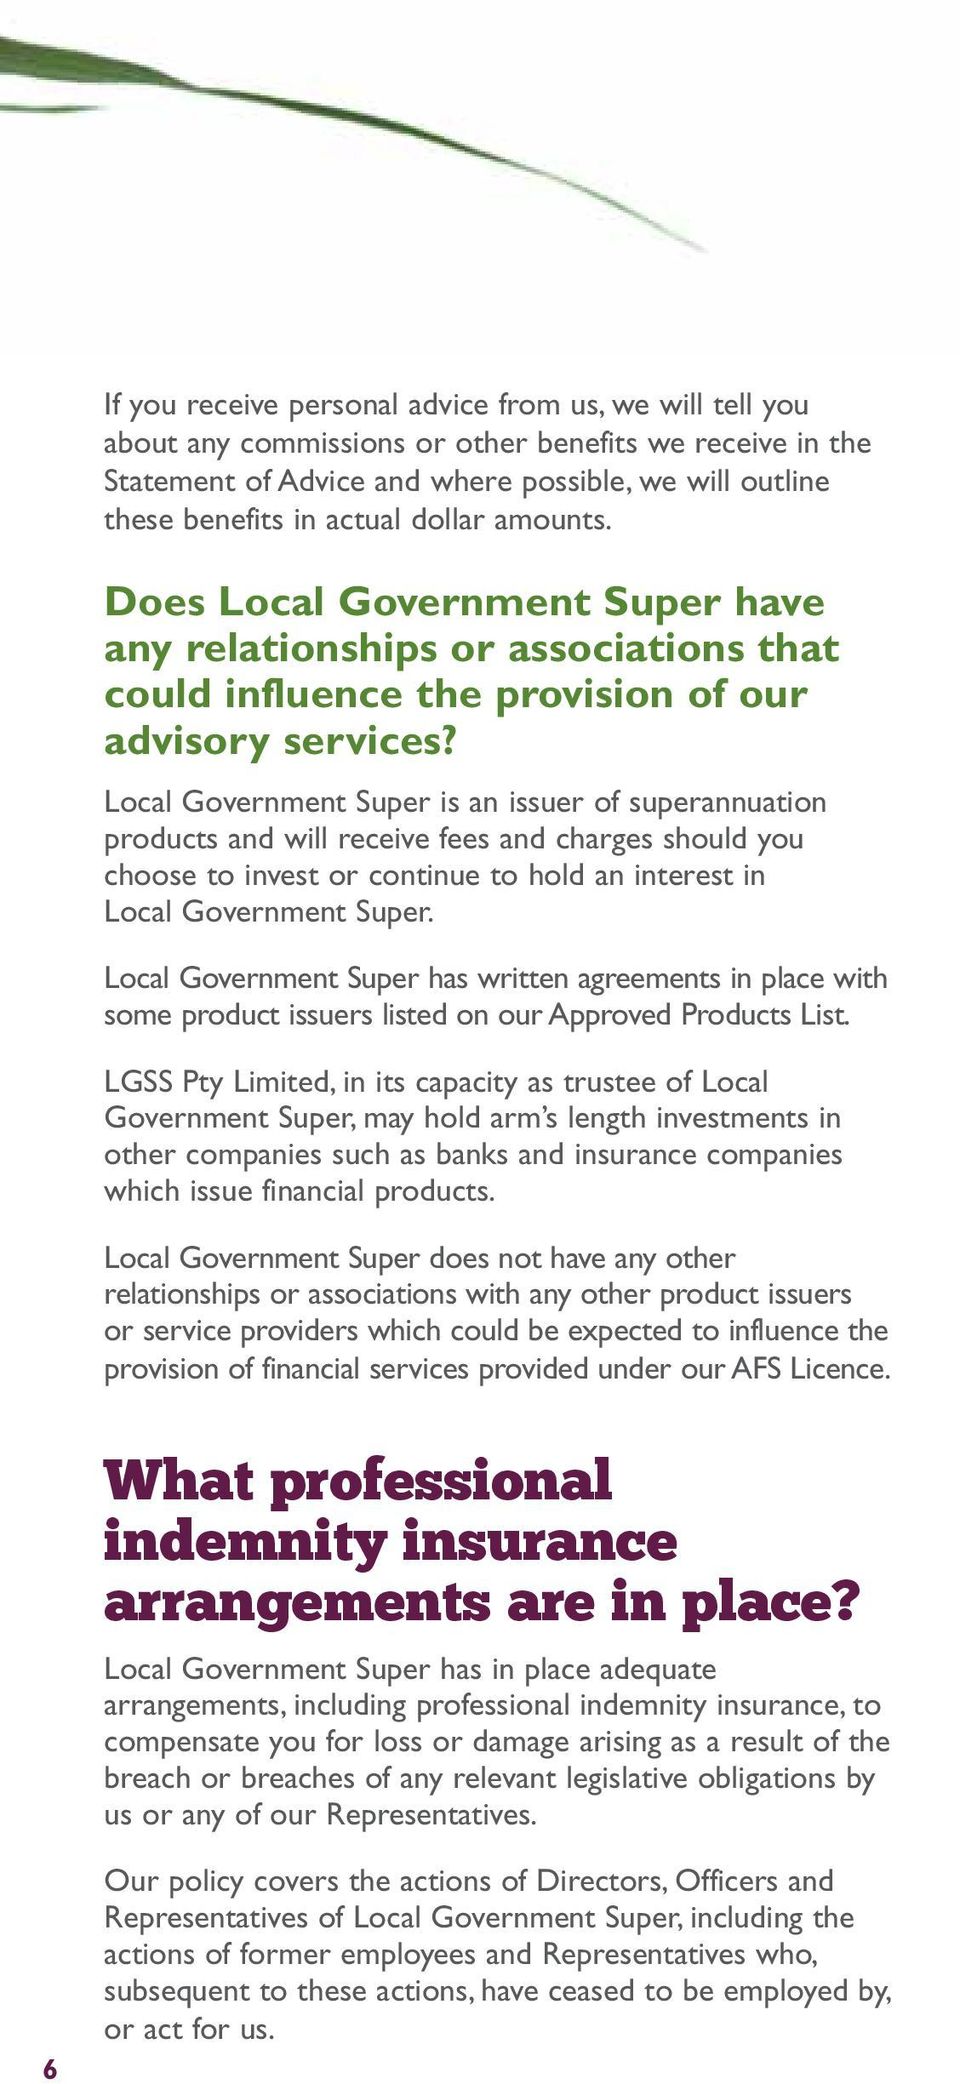 Local Government Super is an issuer of superannuation products and will receive fees and charges should you choose to invest or continue to hold an interest in Local Government Super.